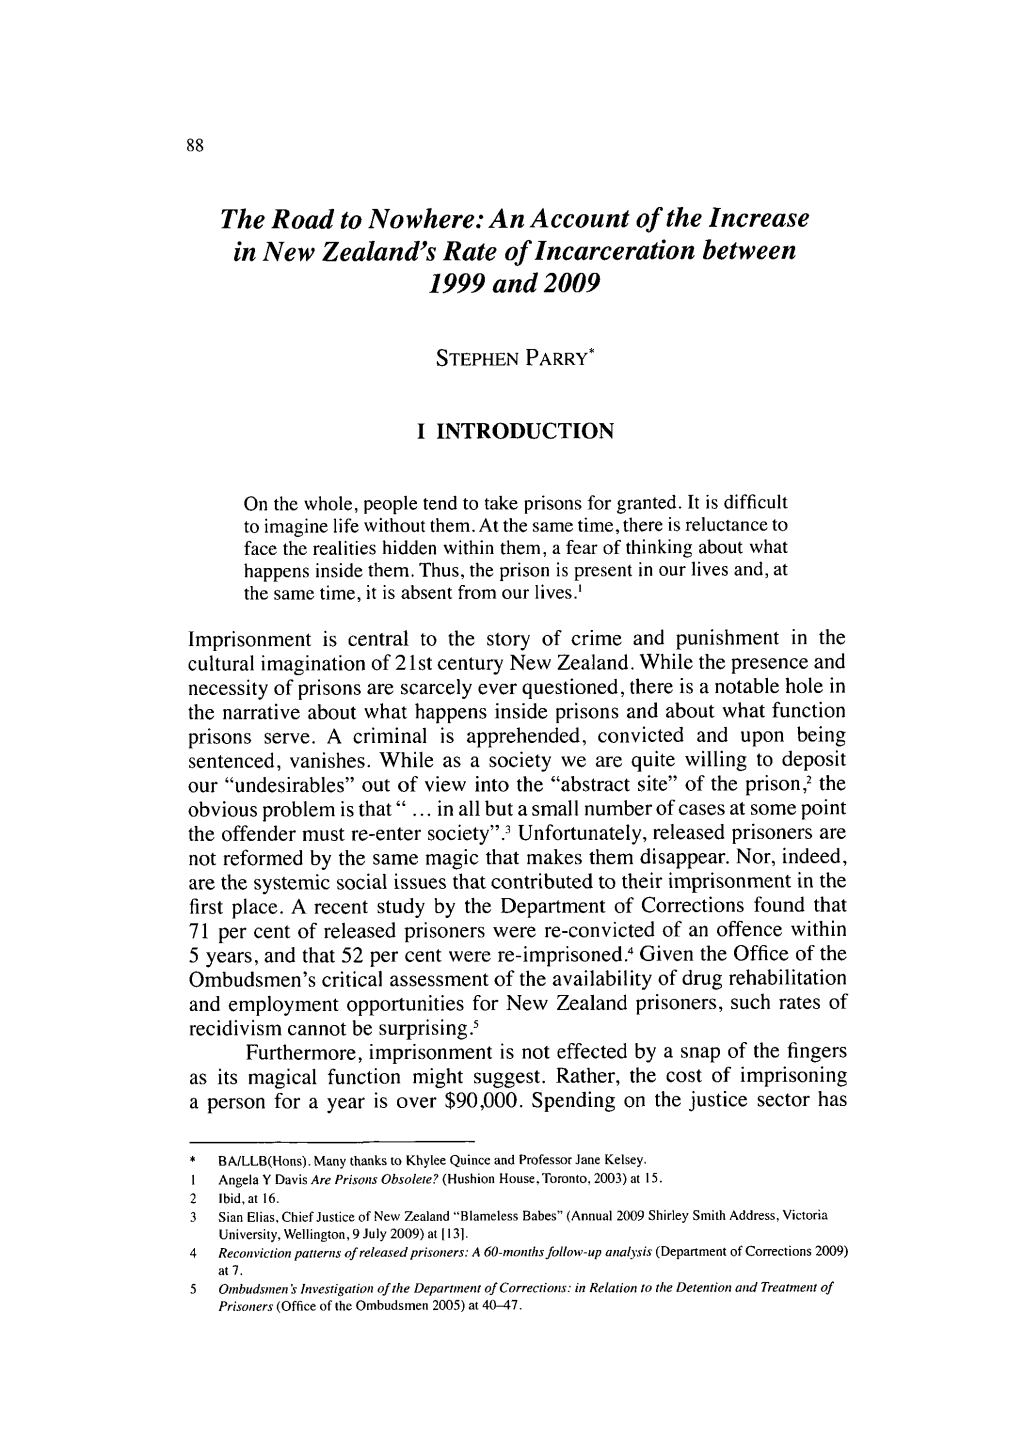 An Account of the Increase in New Zealand's Rate of Incarceration Between 1999 and 2009